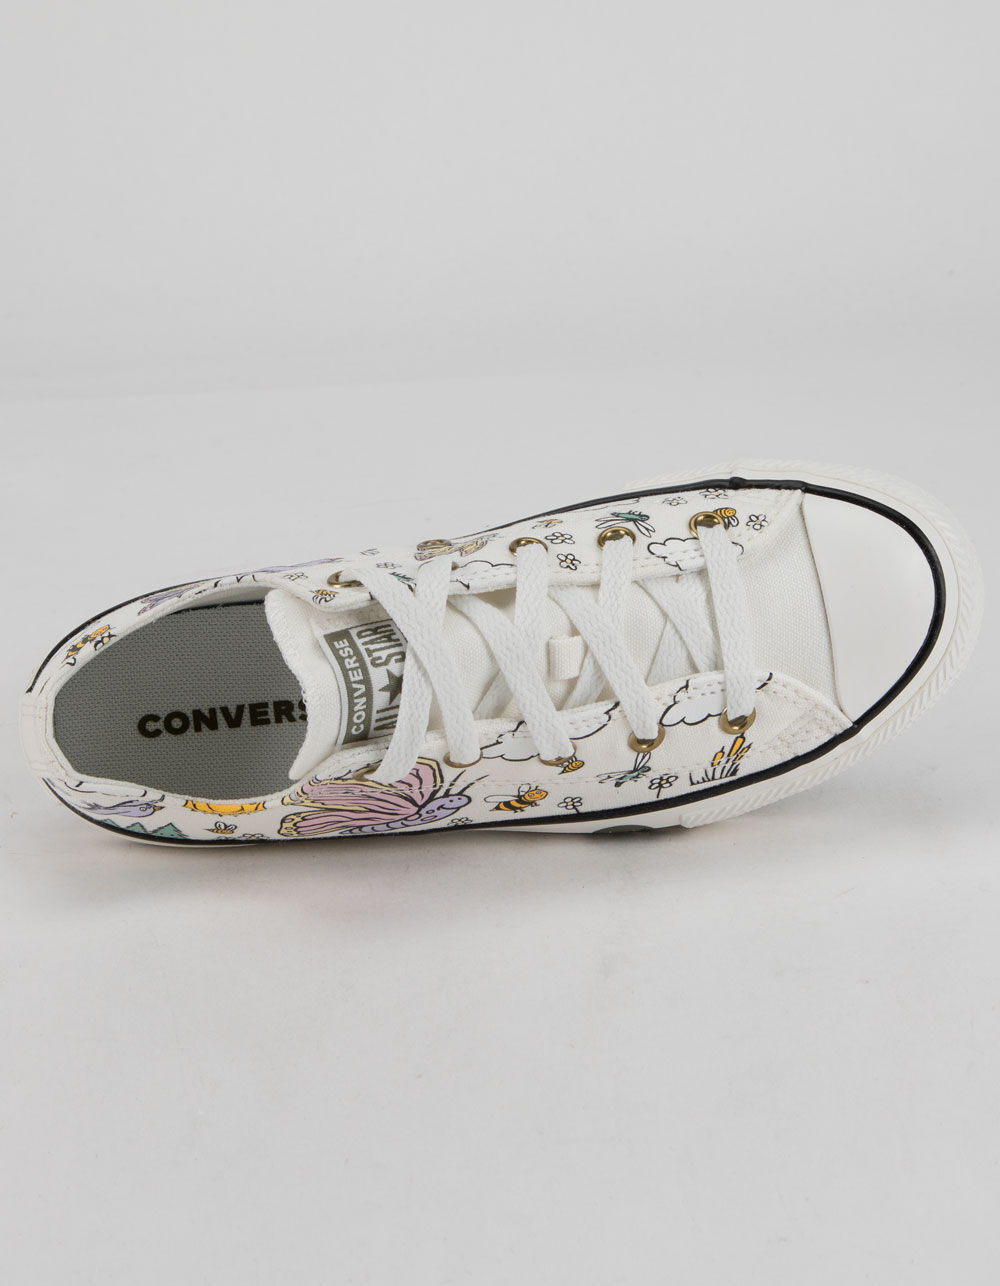 CONVERSE Camp Converse Chuck Taylor All Star Girls Low Top Shoes ...